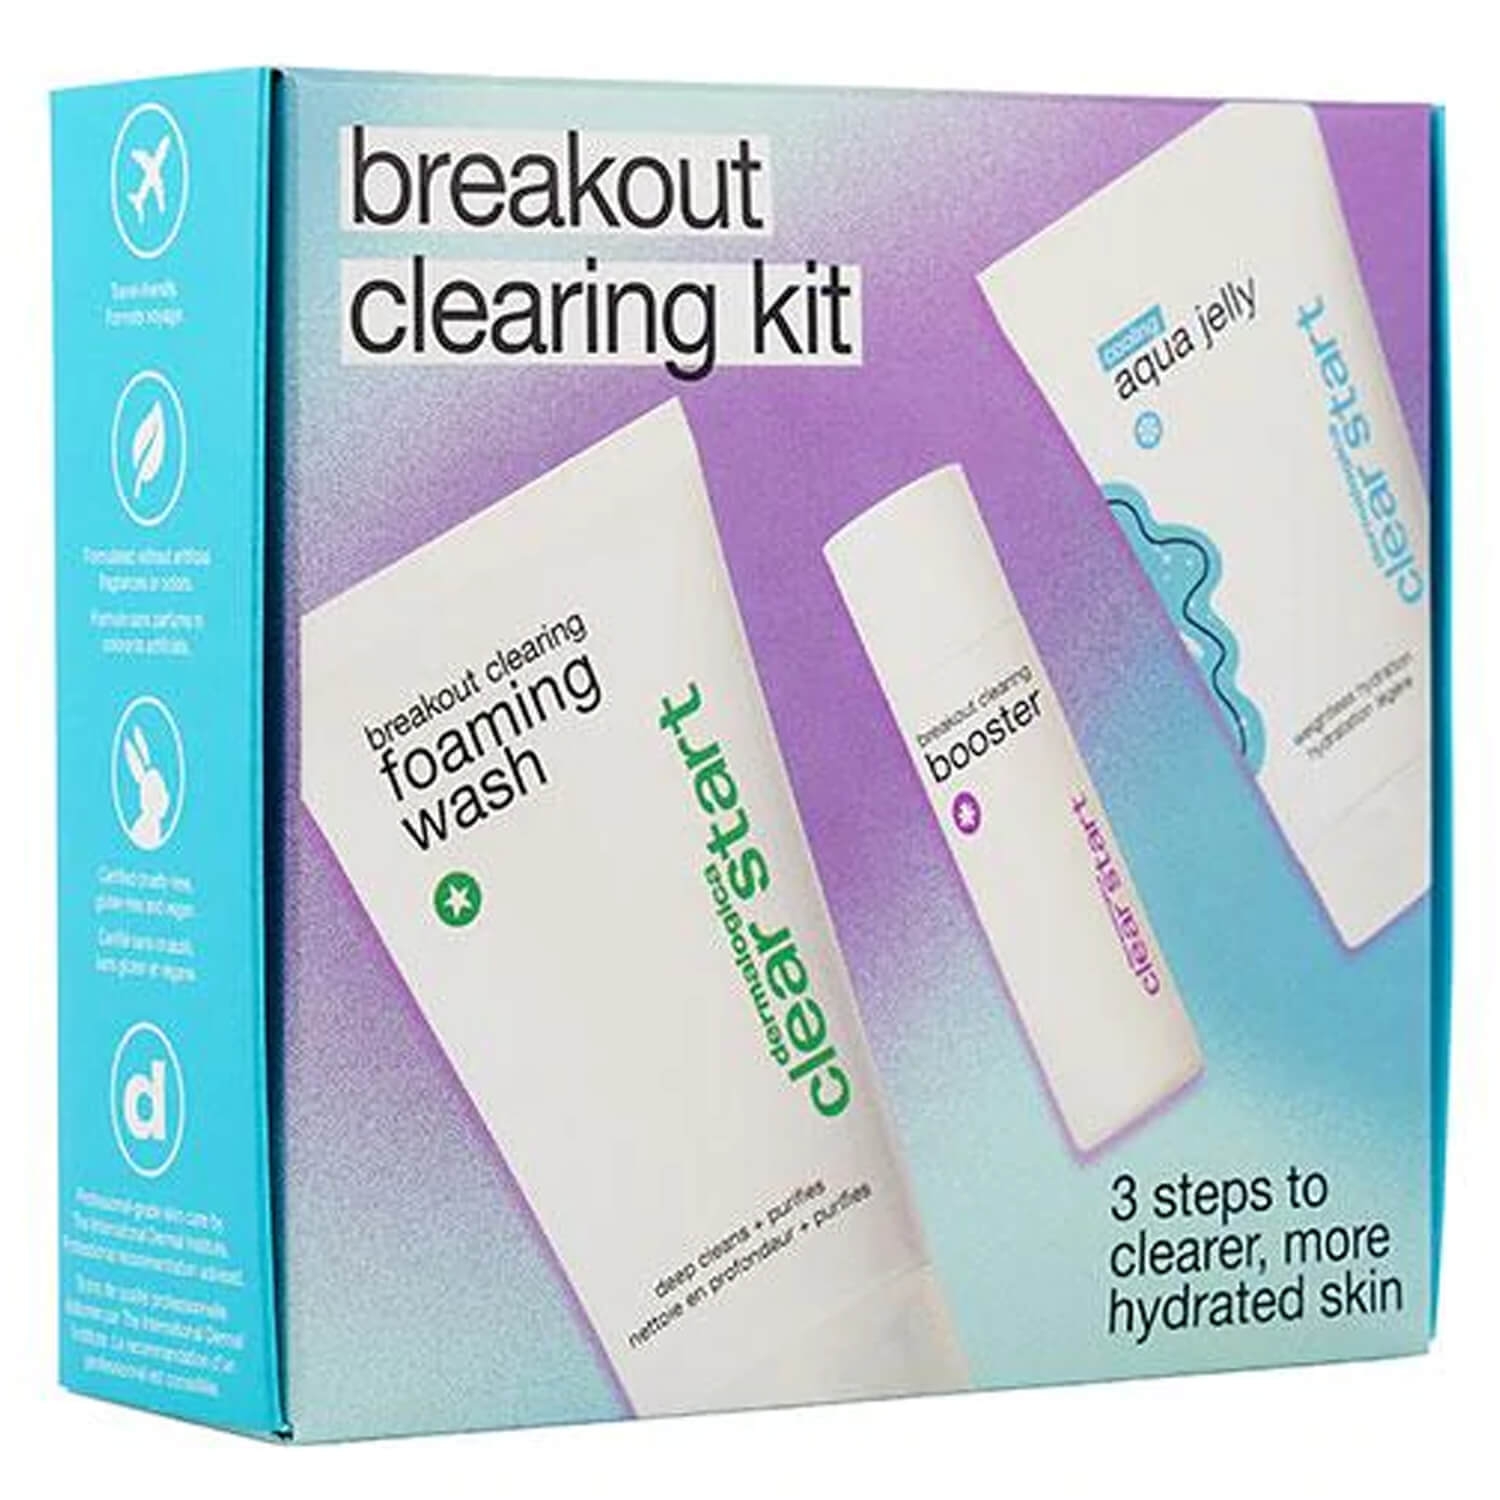 Product image from Clear Start - Breakout Clearing Kit